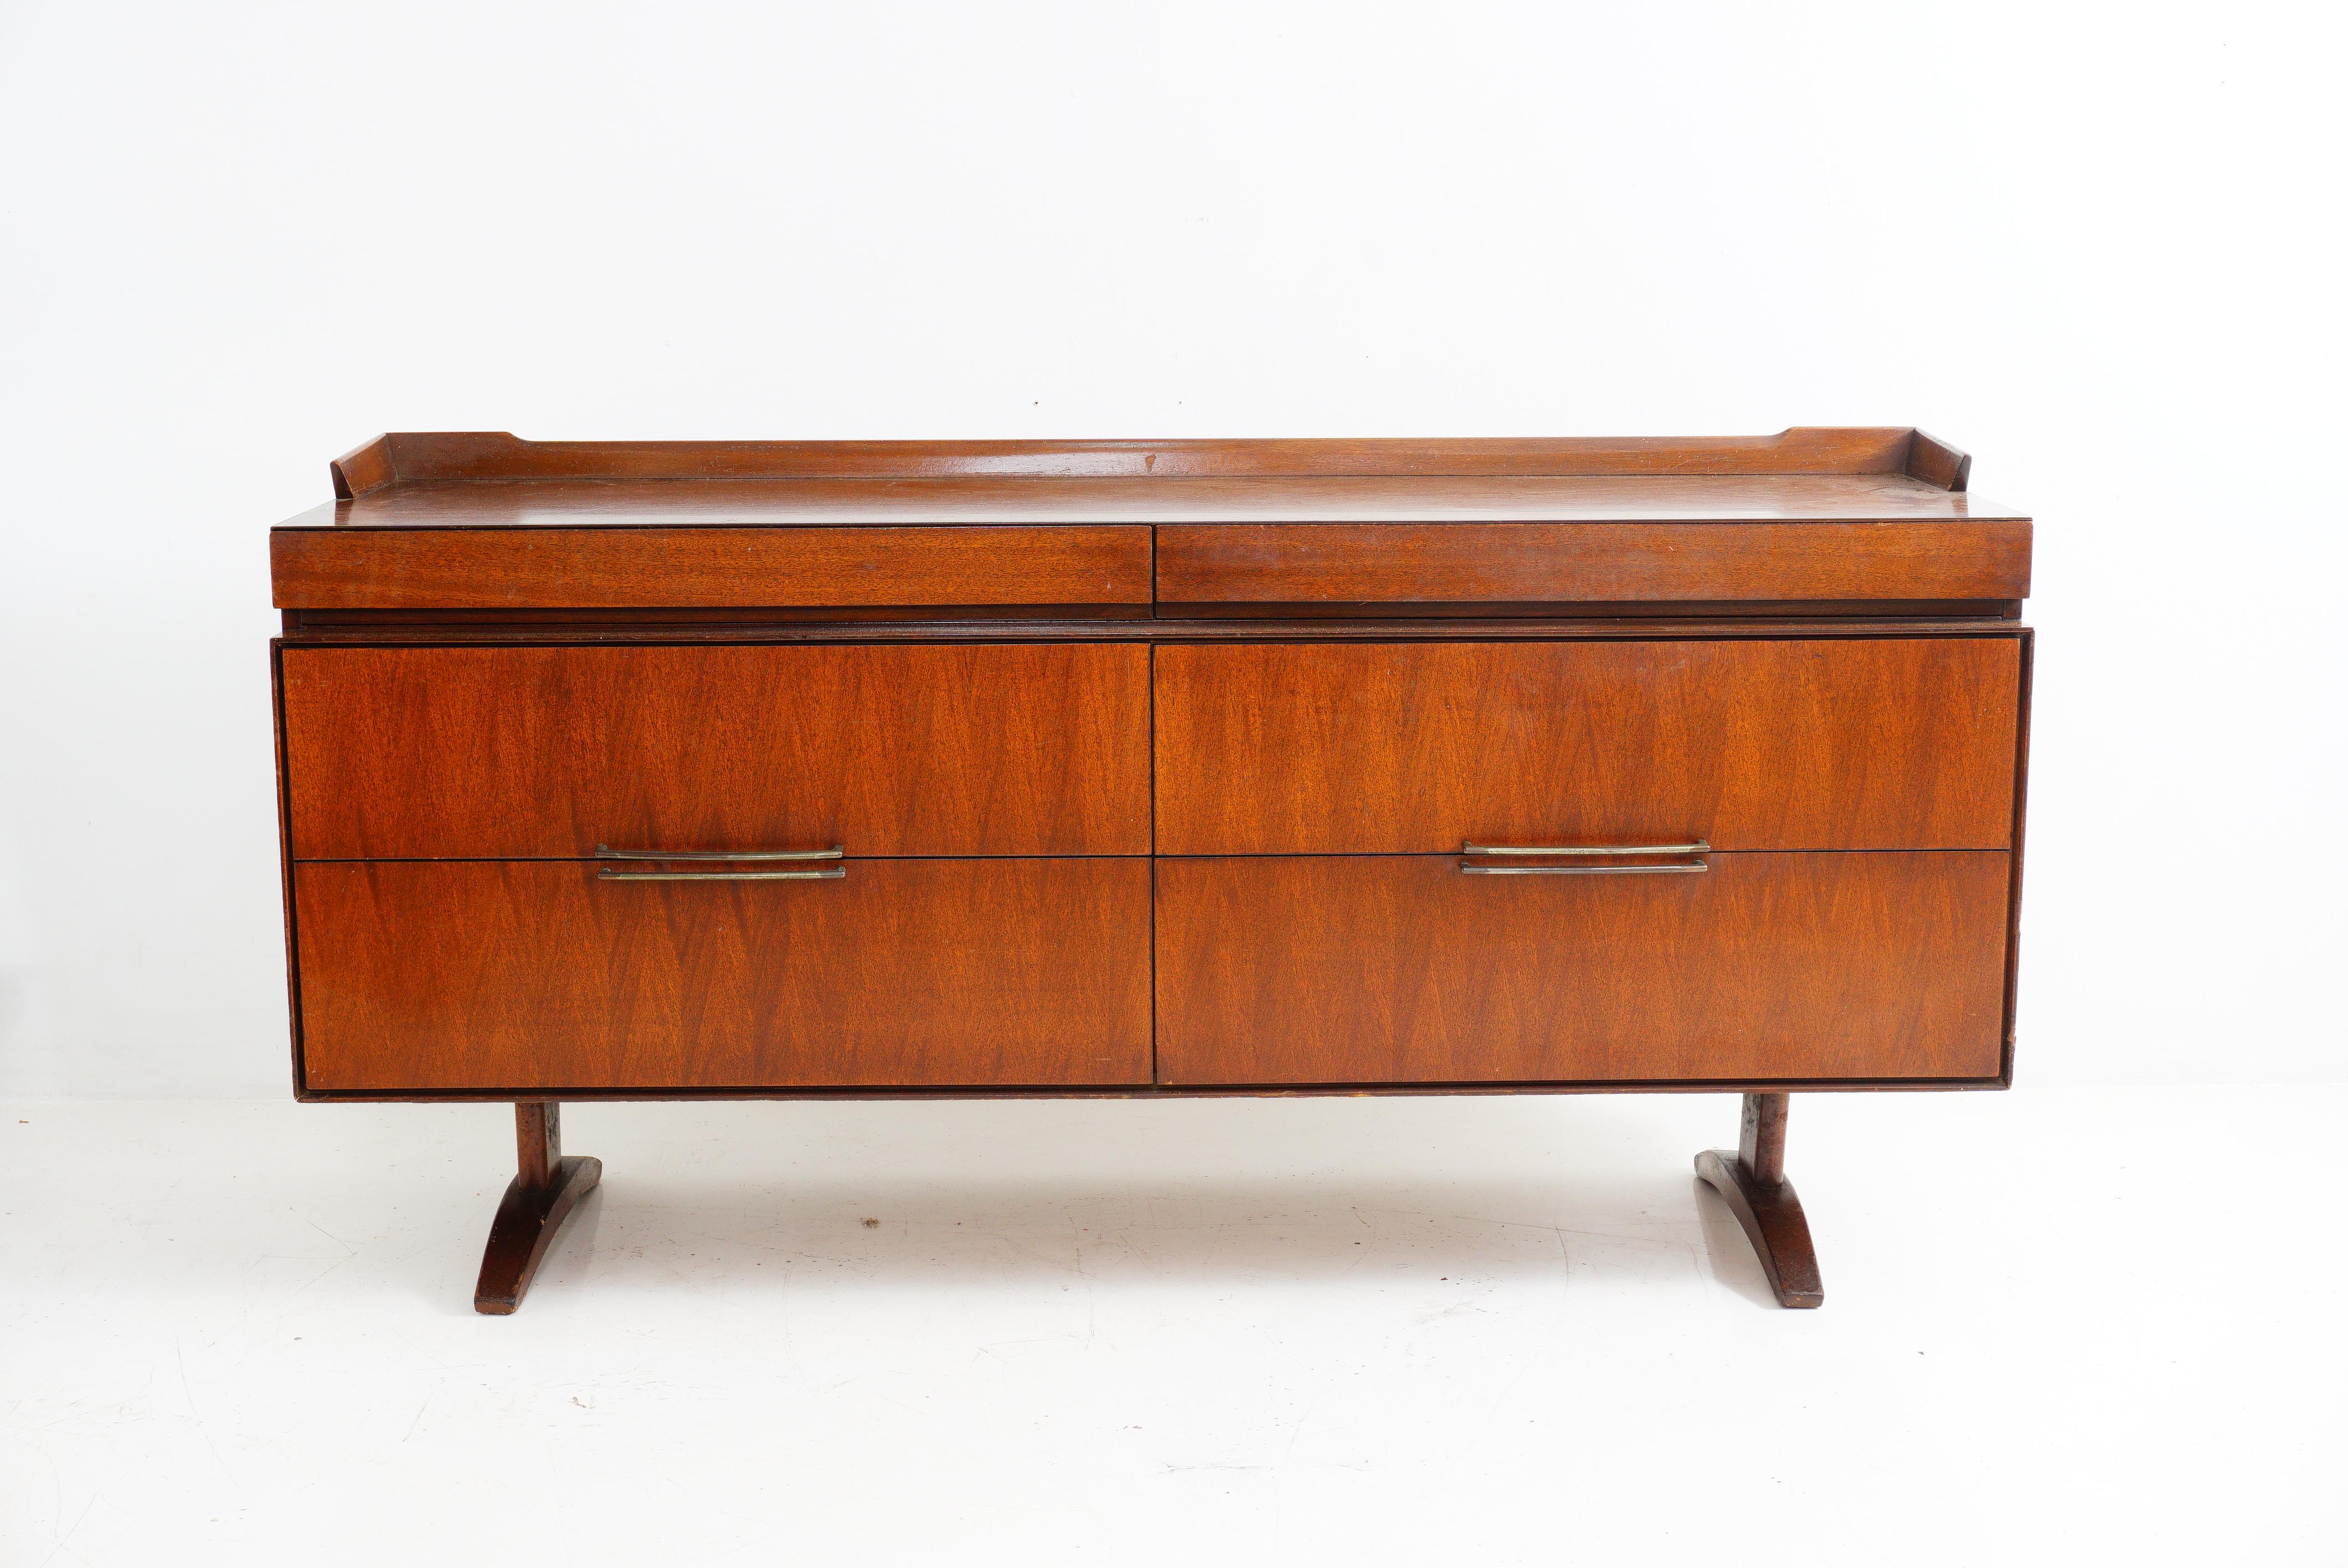 A Mid-Century Modern sideboard that effortlessly combines sleek lines and warm charm. Crafted from rich walnut, this sideboard brings both functional storage and a touch of retro sophistication to your space. Elevate your décor game with a nod to